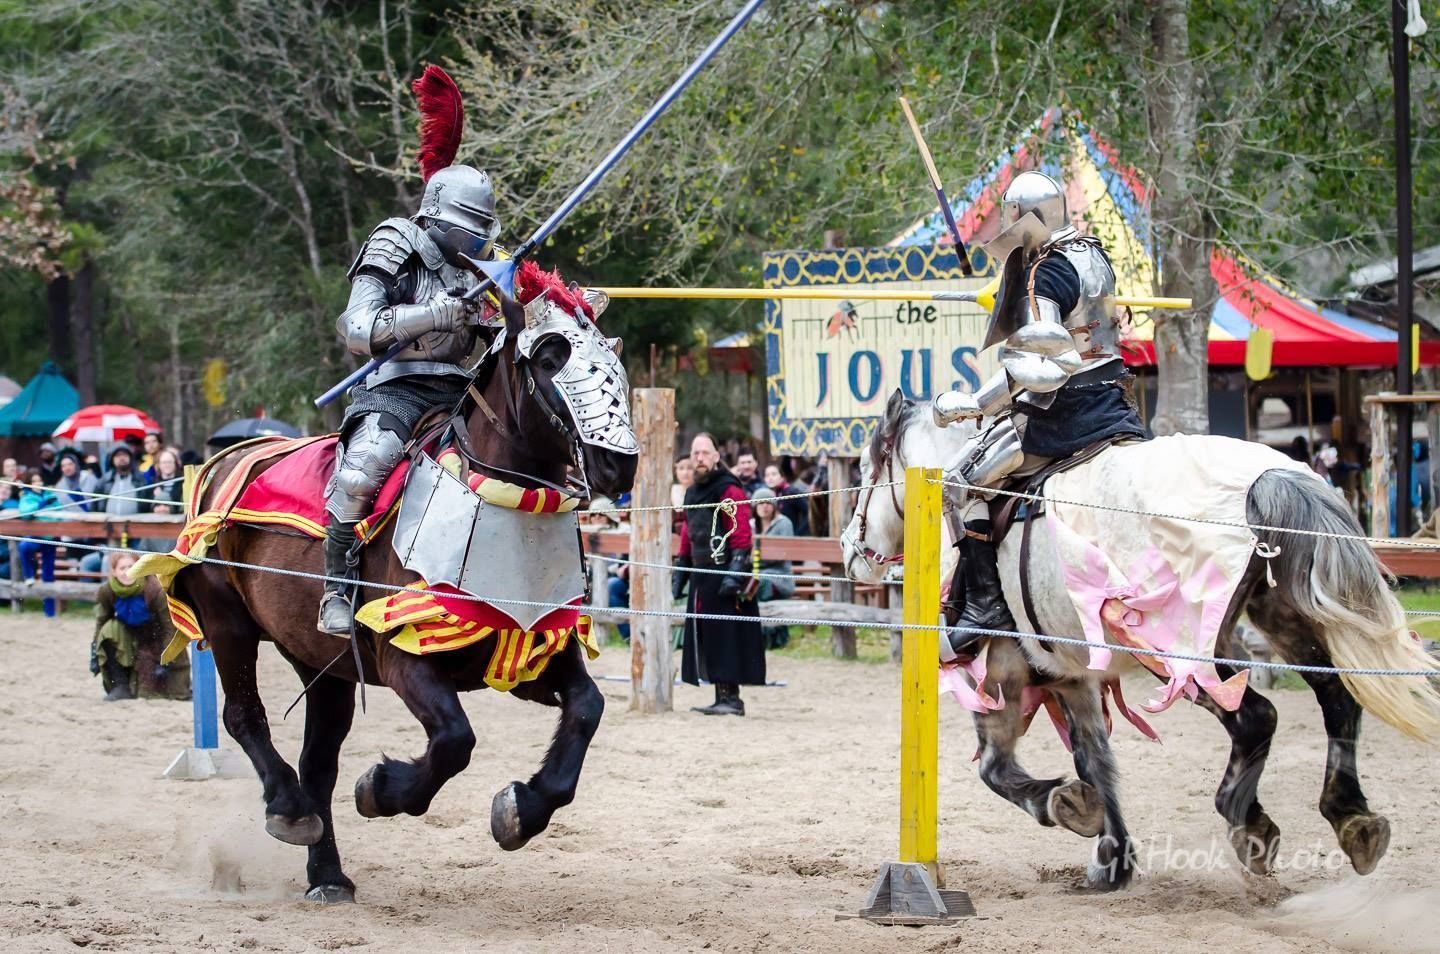 David Schade jousts Eddie Rigney during the mid-faire jousting tournament at  Sherwood Forest Faire 2015 (photo by GRHook Photo)